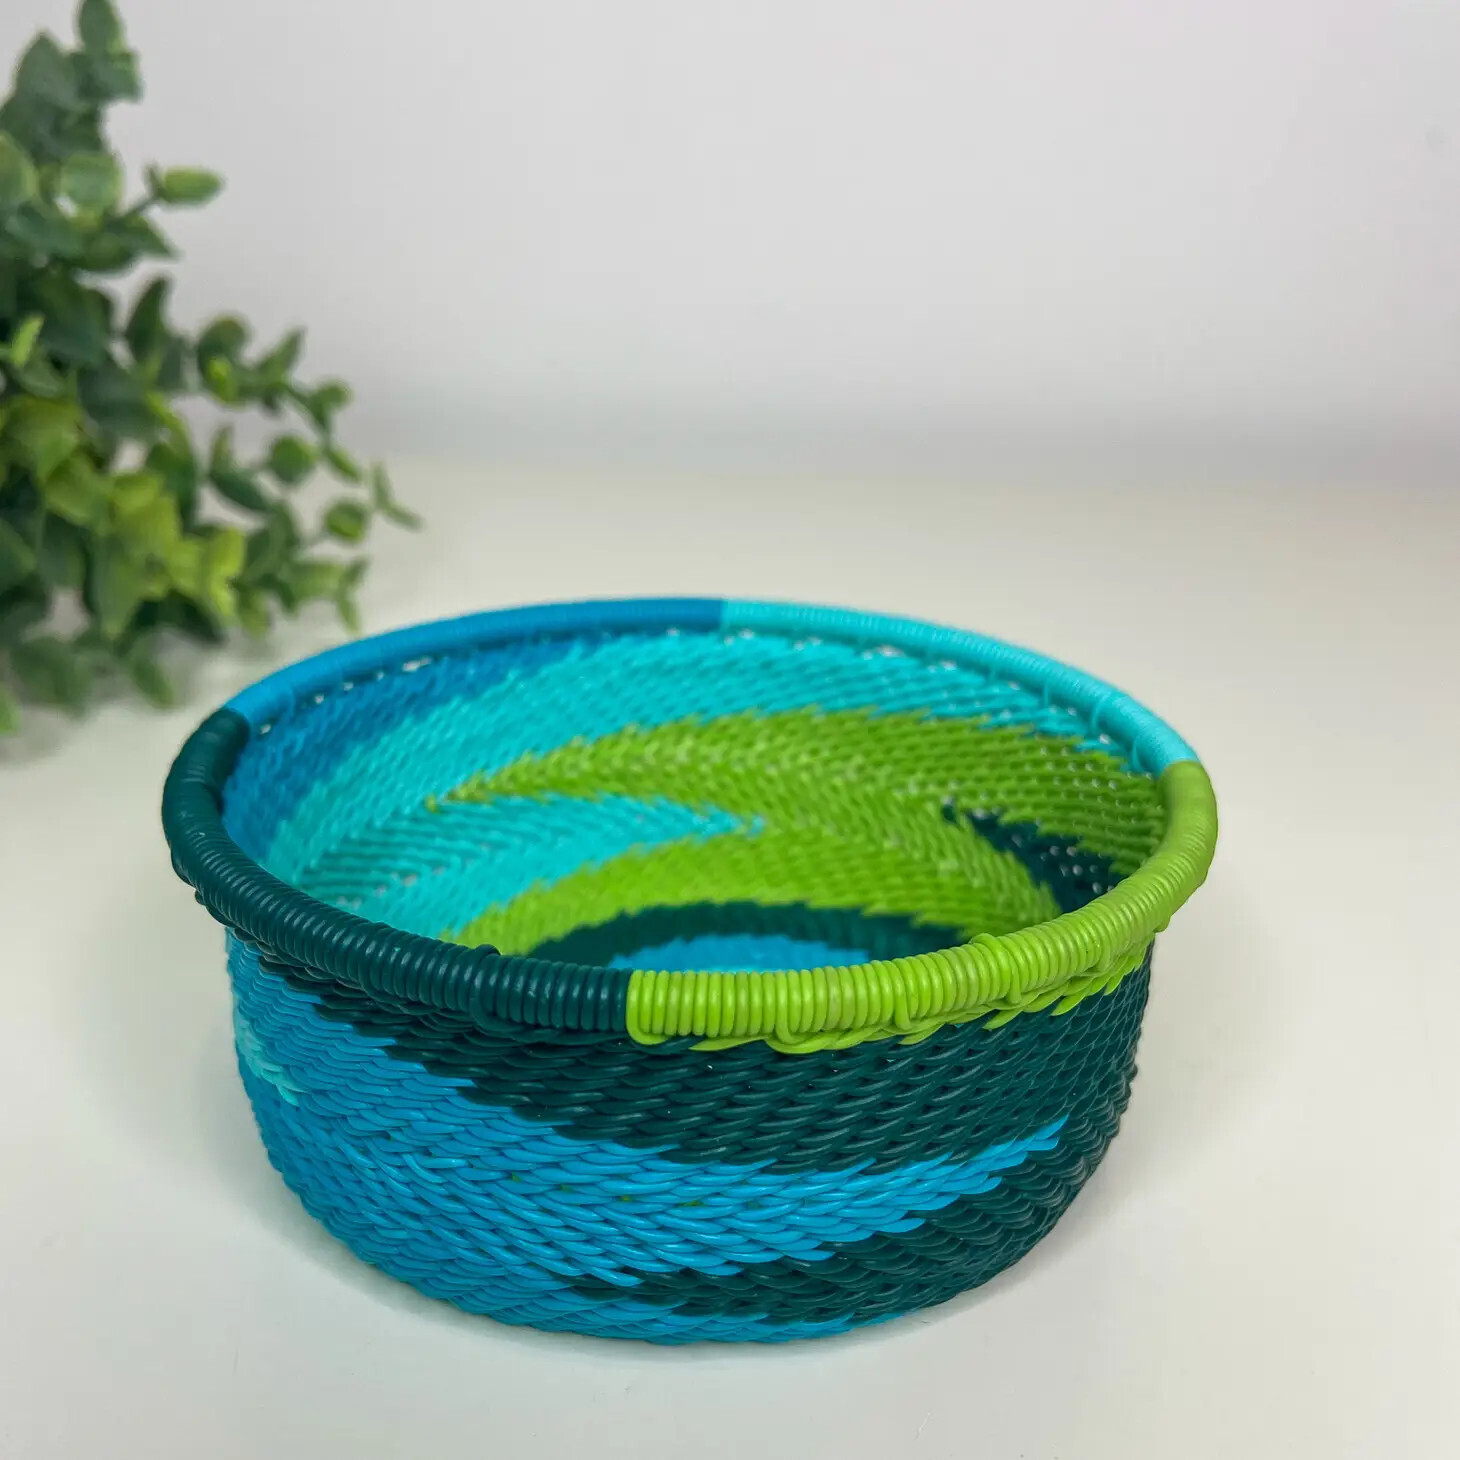 Telephone wire basket ~ African Spring